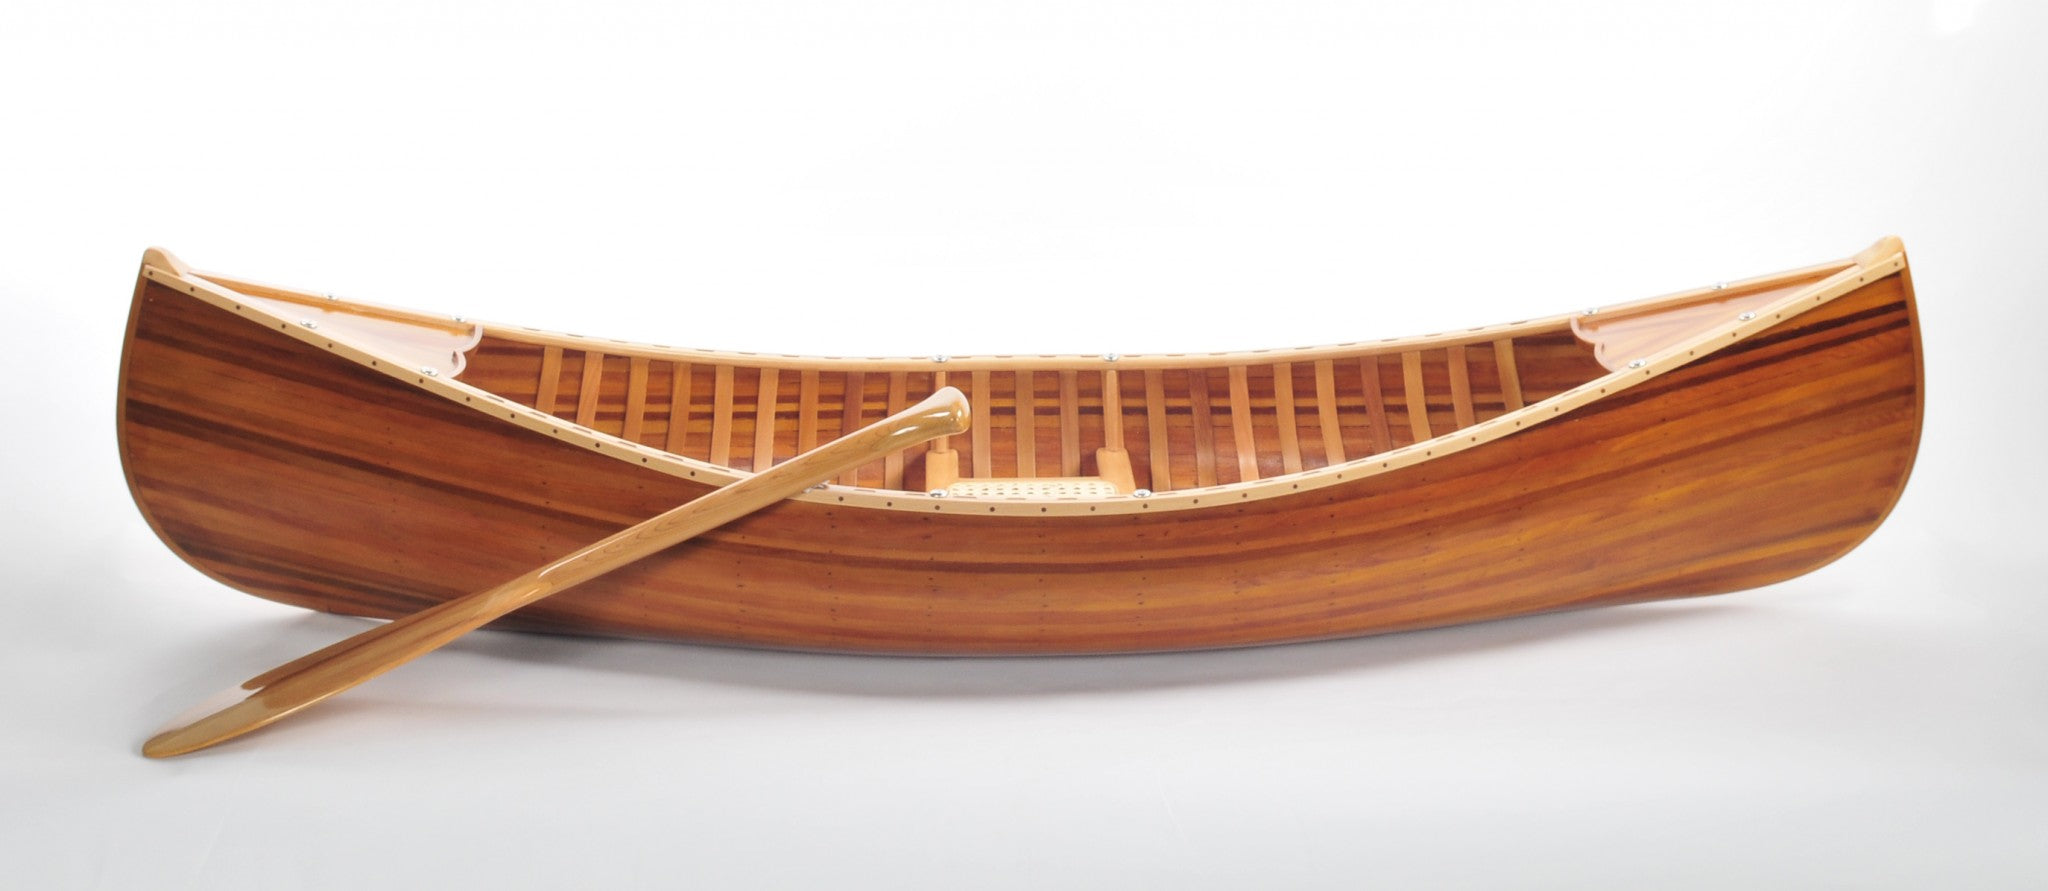 20.25" X 70.5" X 15" Wooden Canoe With Ribs Matte Finish